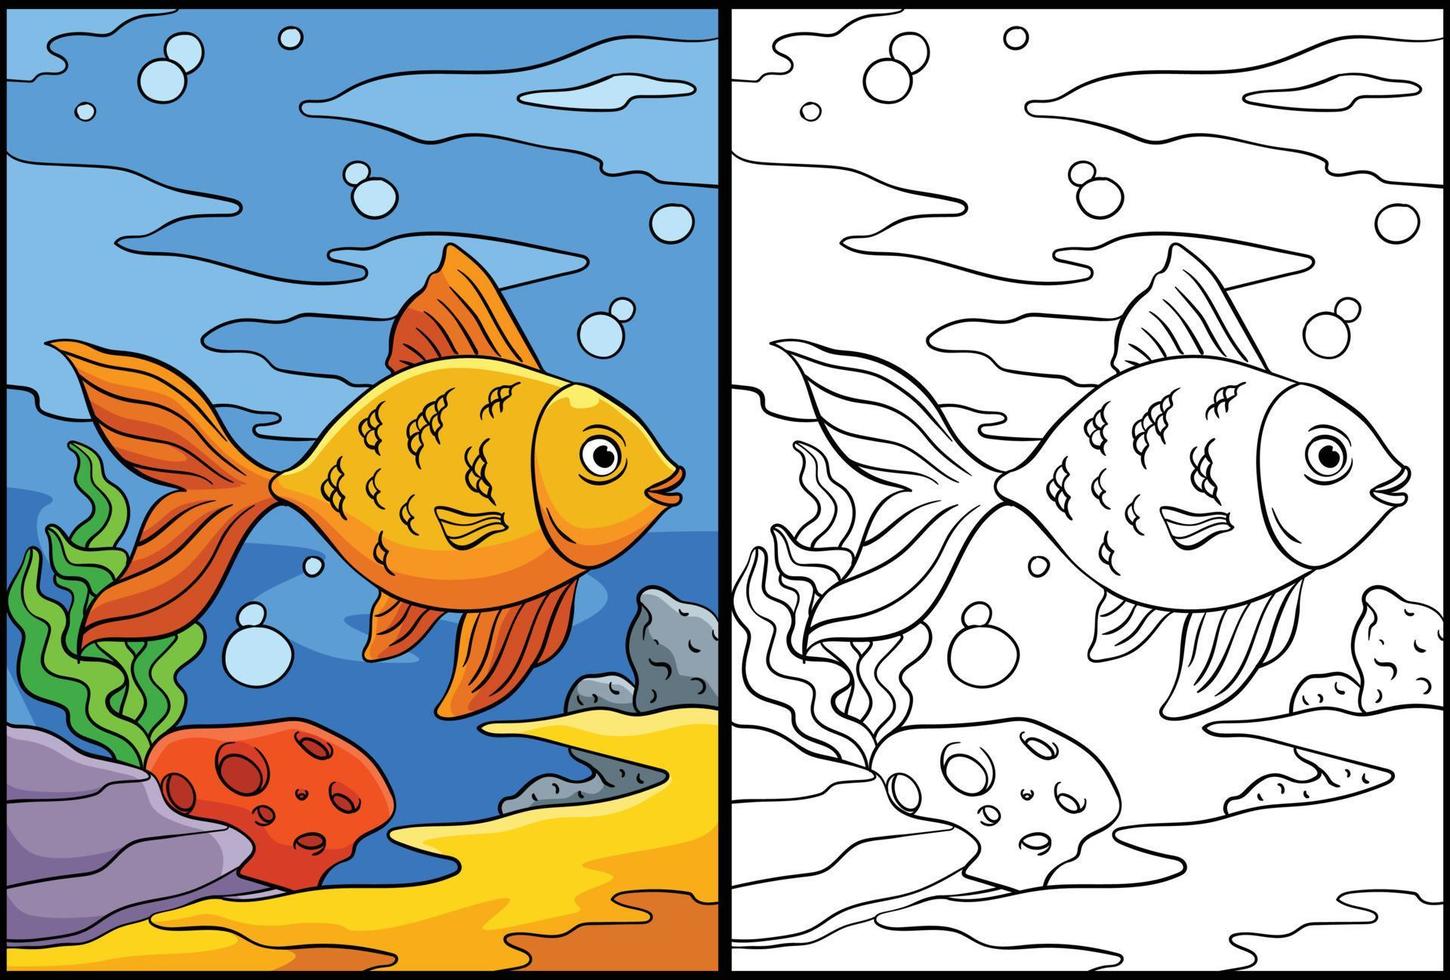 Goldfish Coloring Page Colored Illustration vector